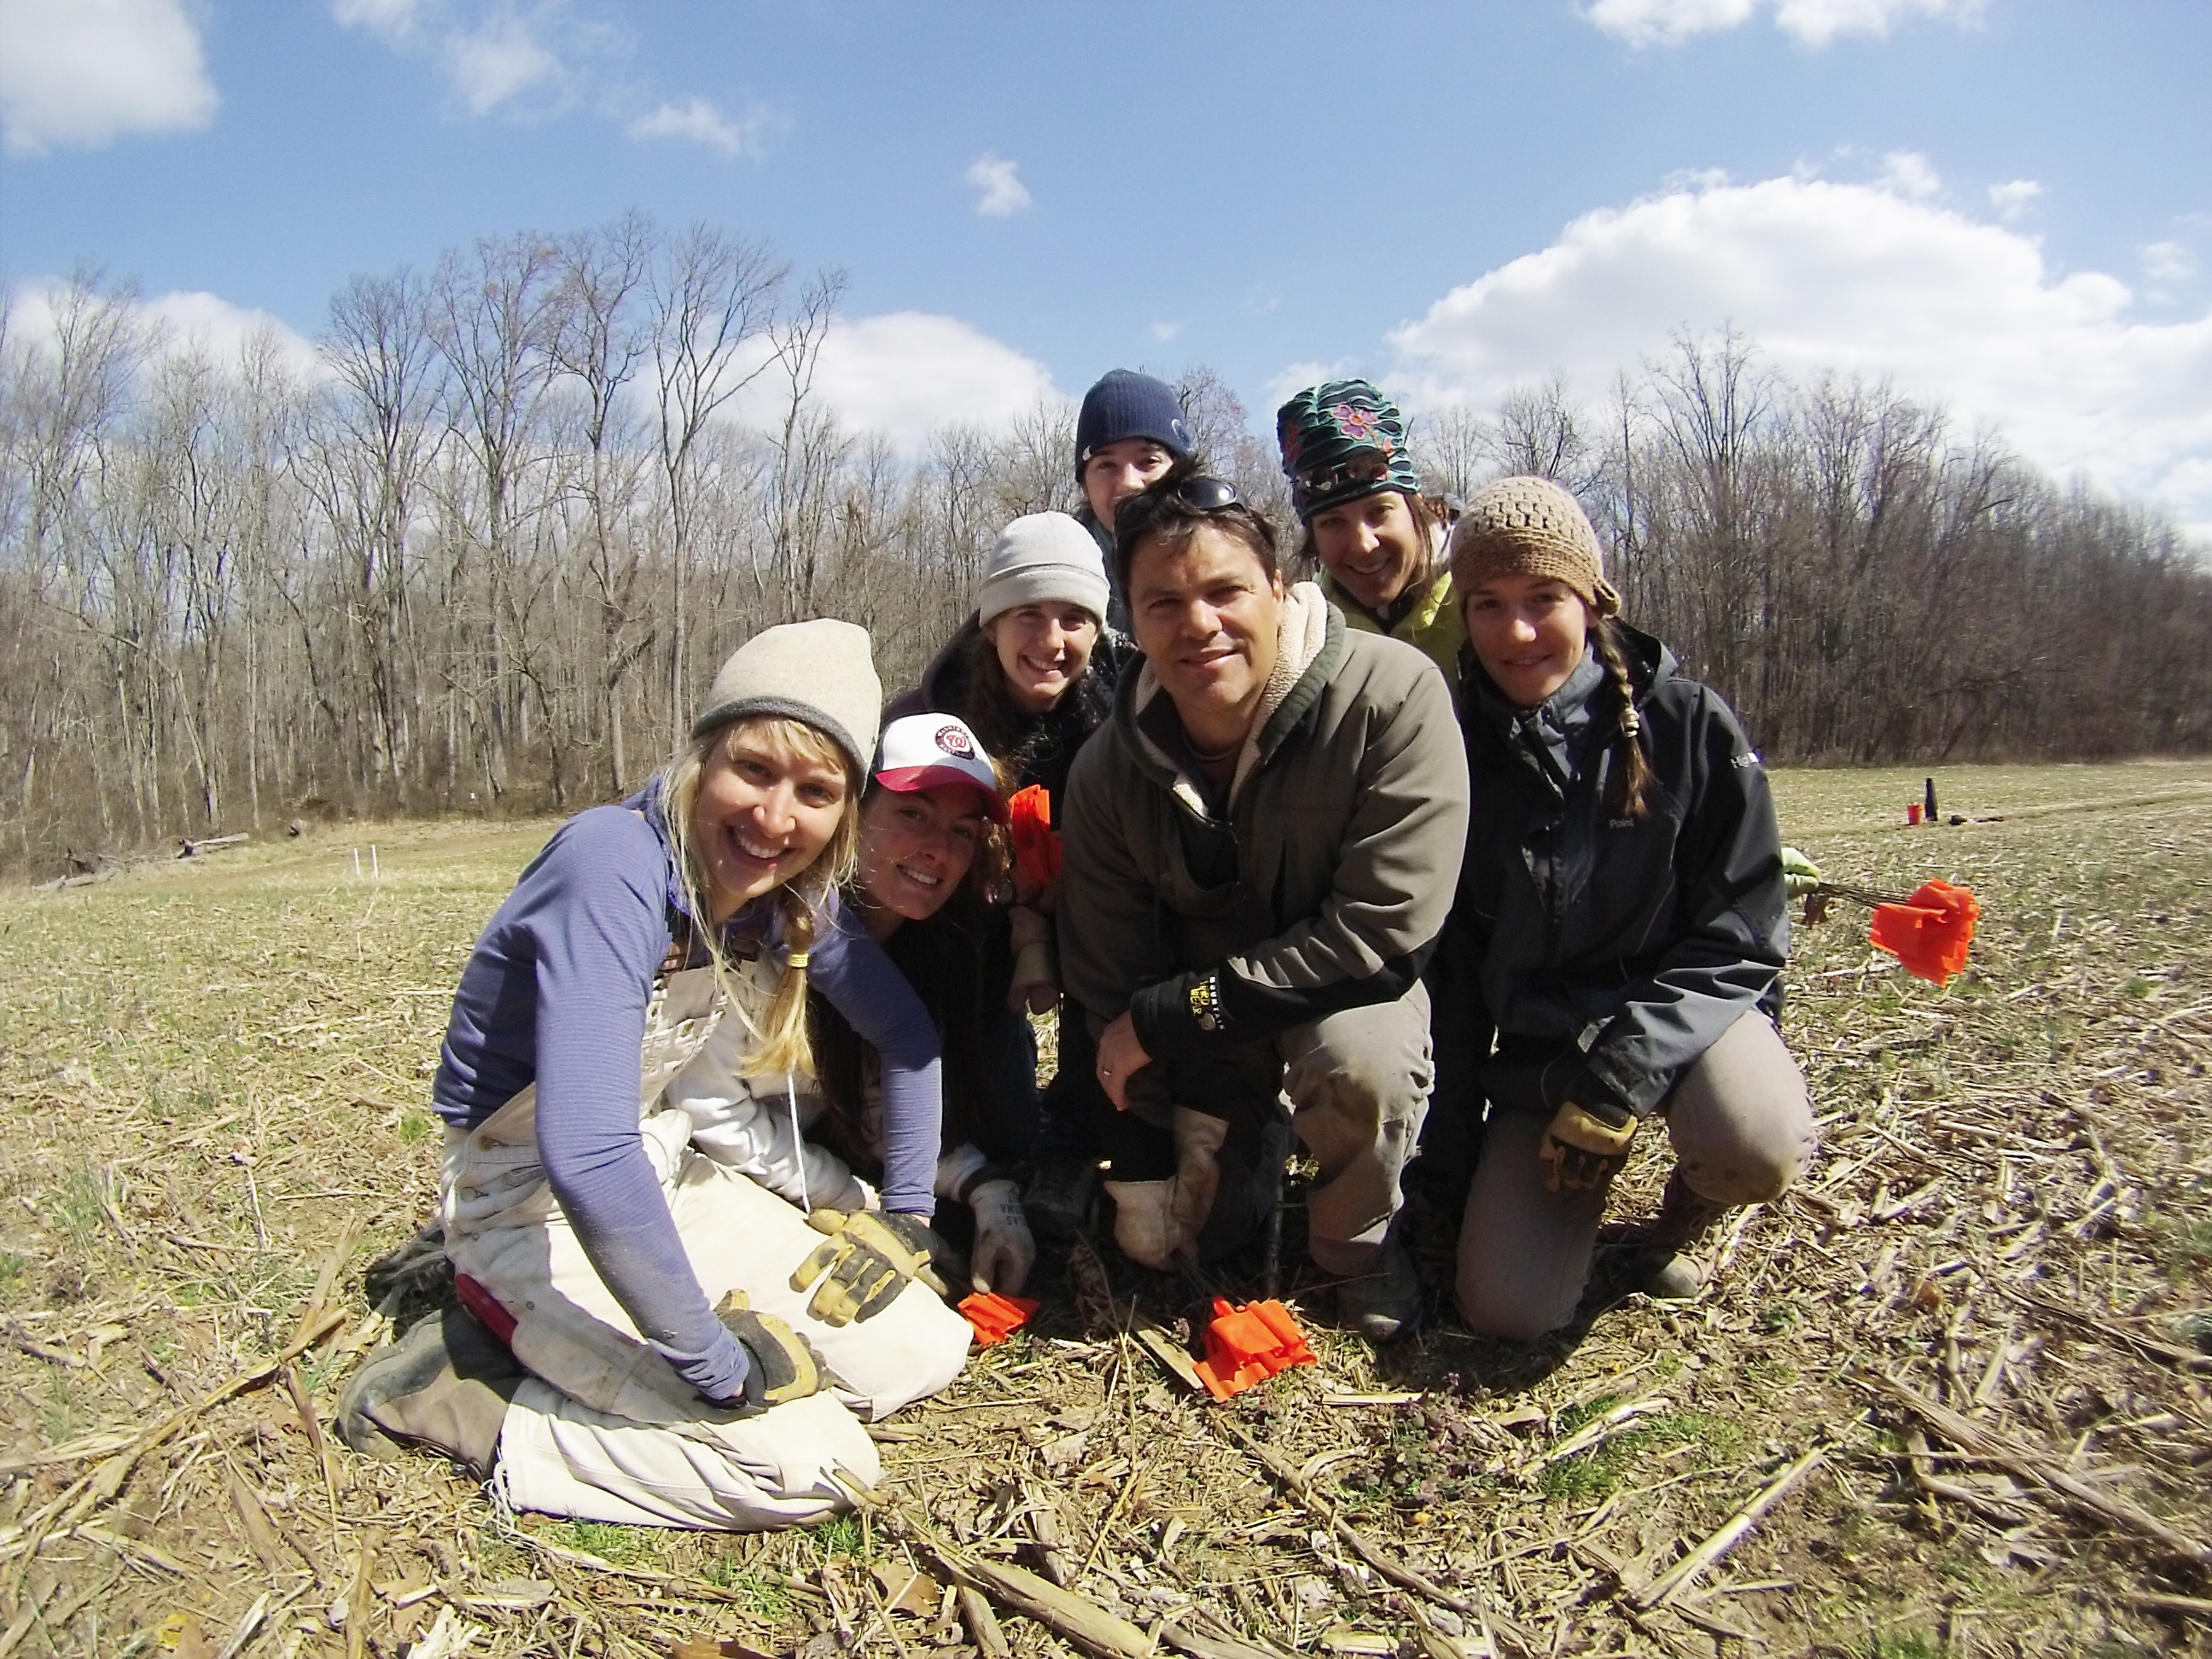 Scientists working on inaugural BiodiversiTREE project pose for group shot